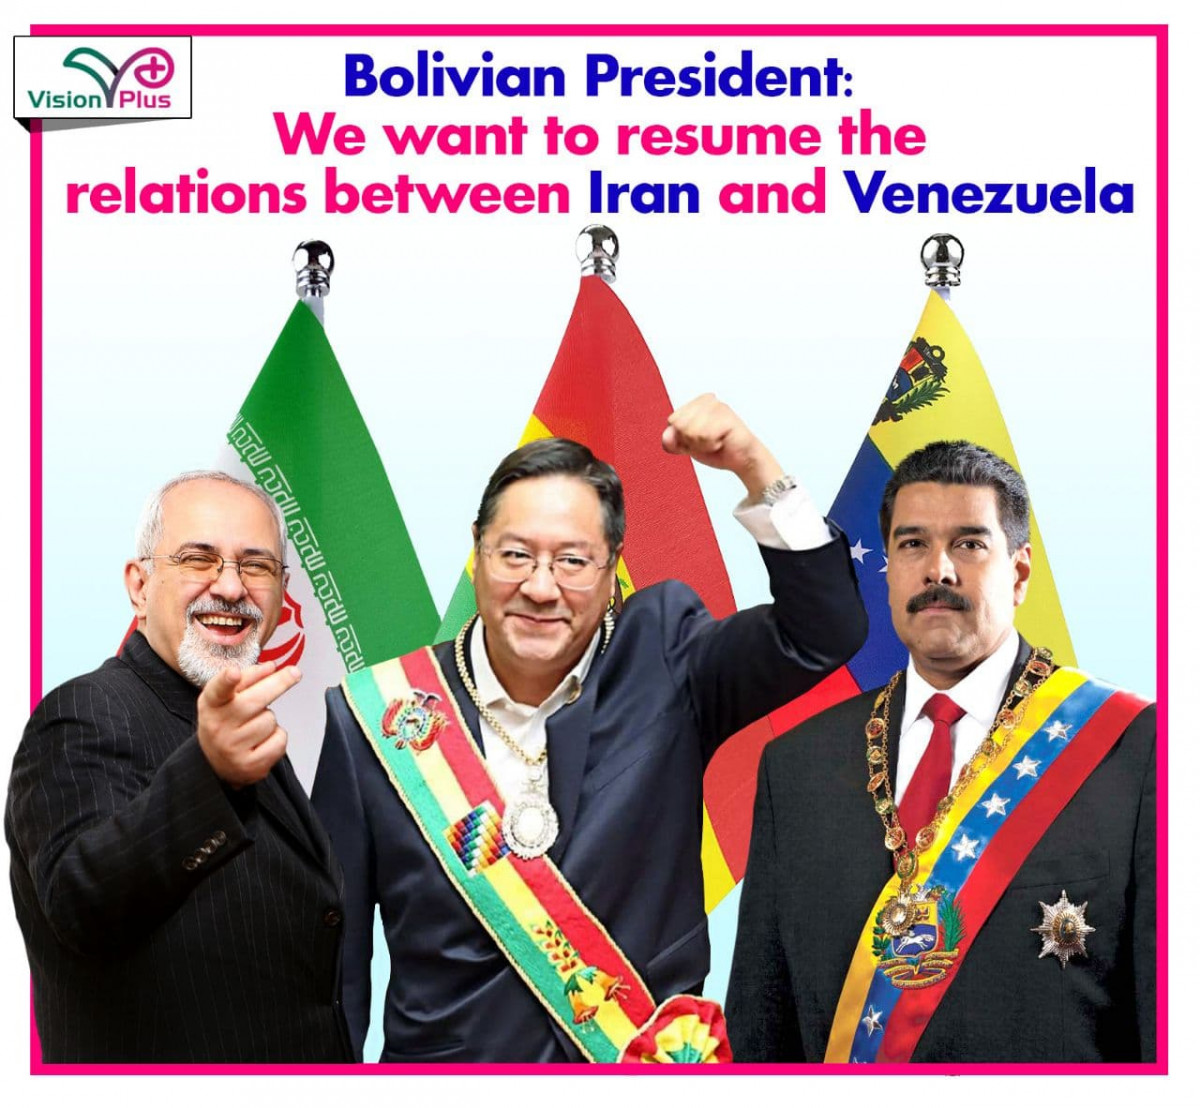 Bolivian President: We want to resume the relations between Iran and Venezuela